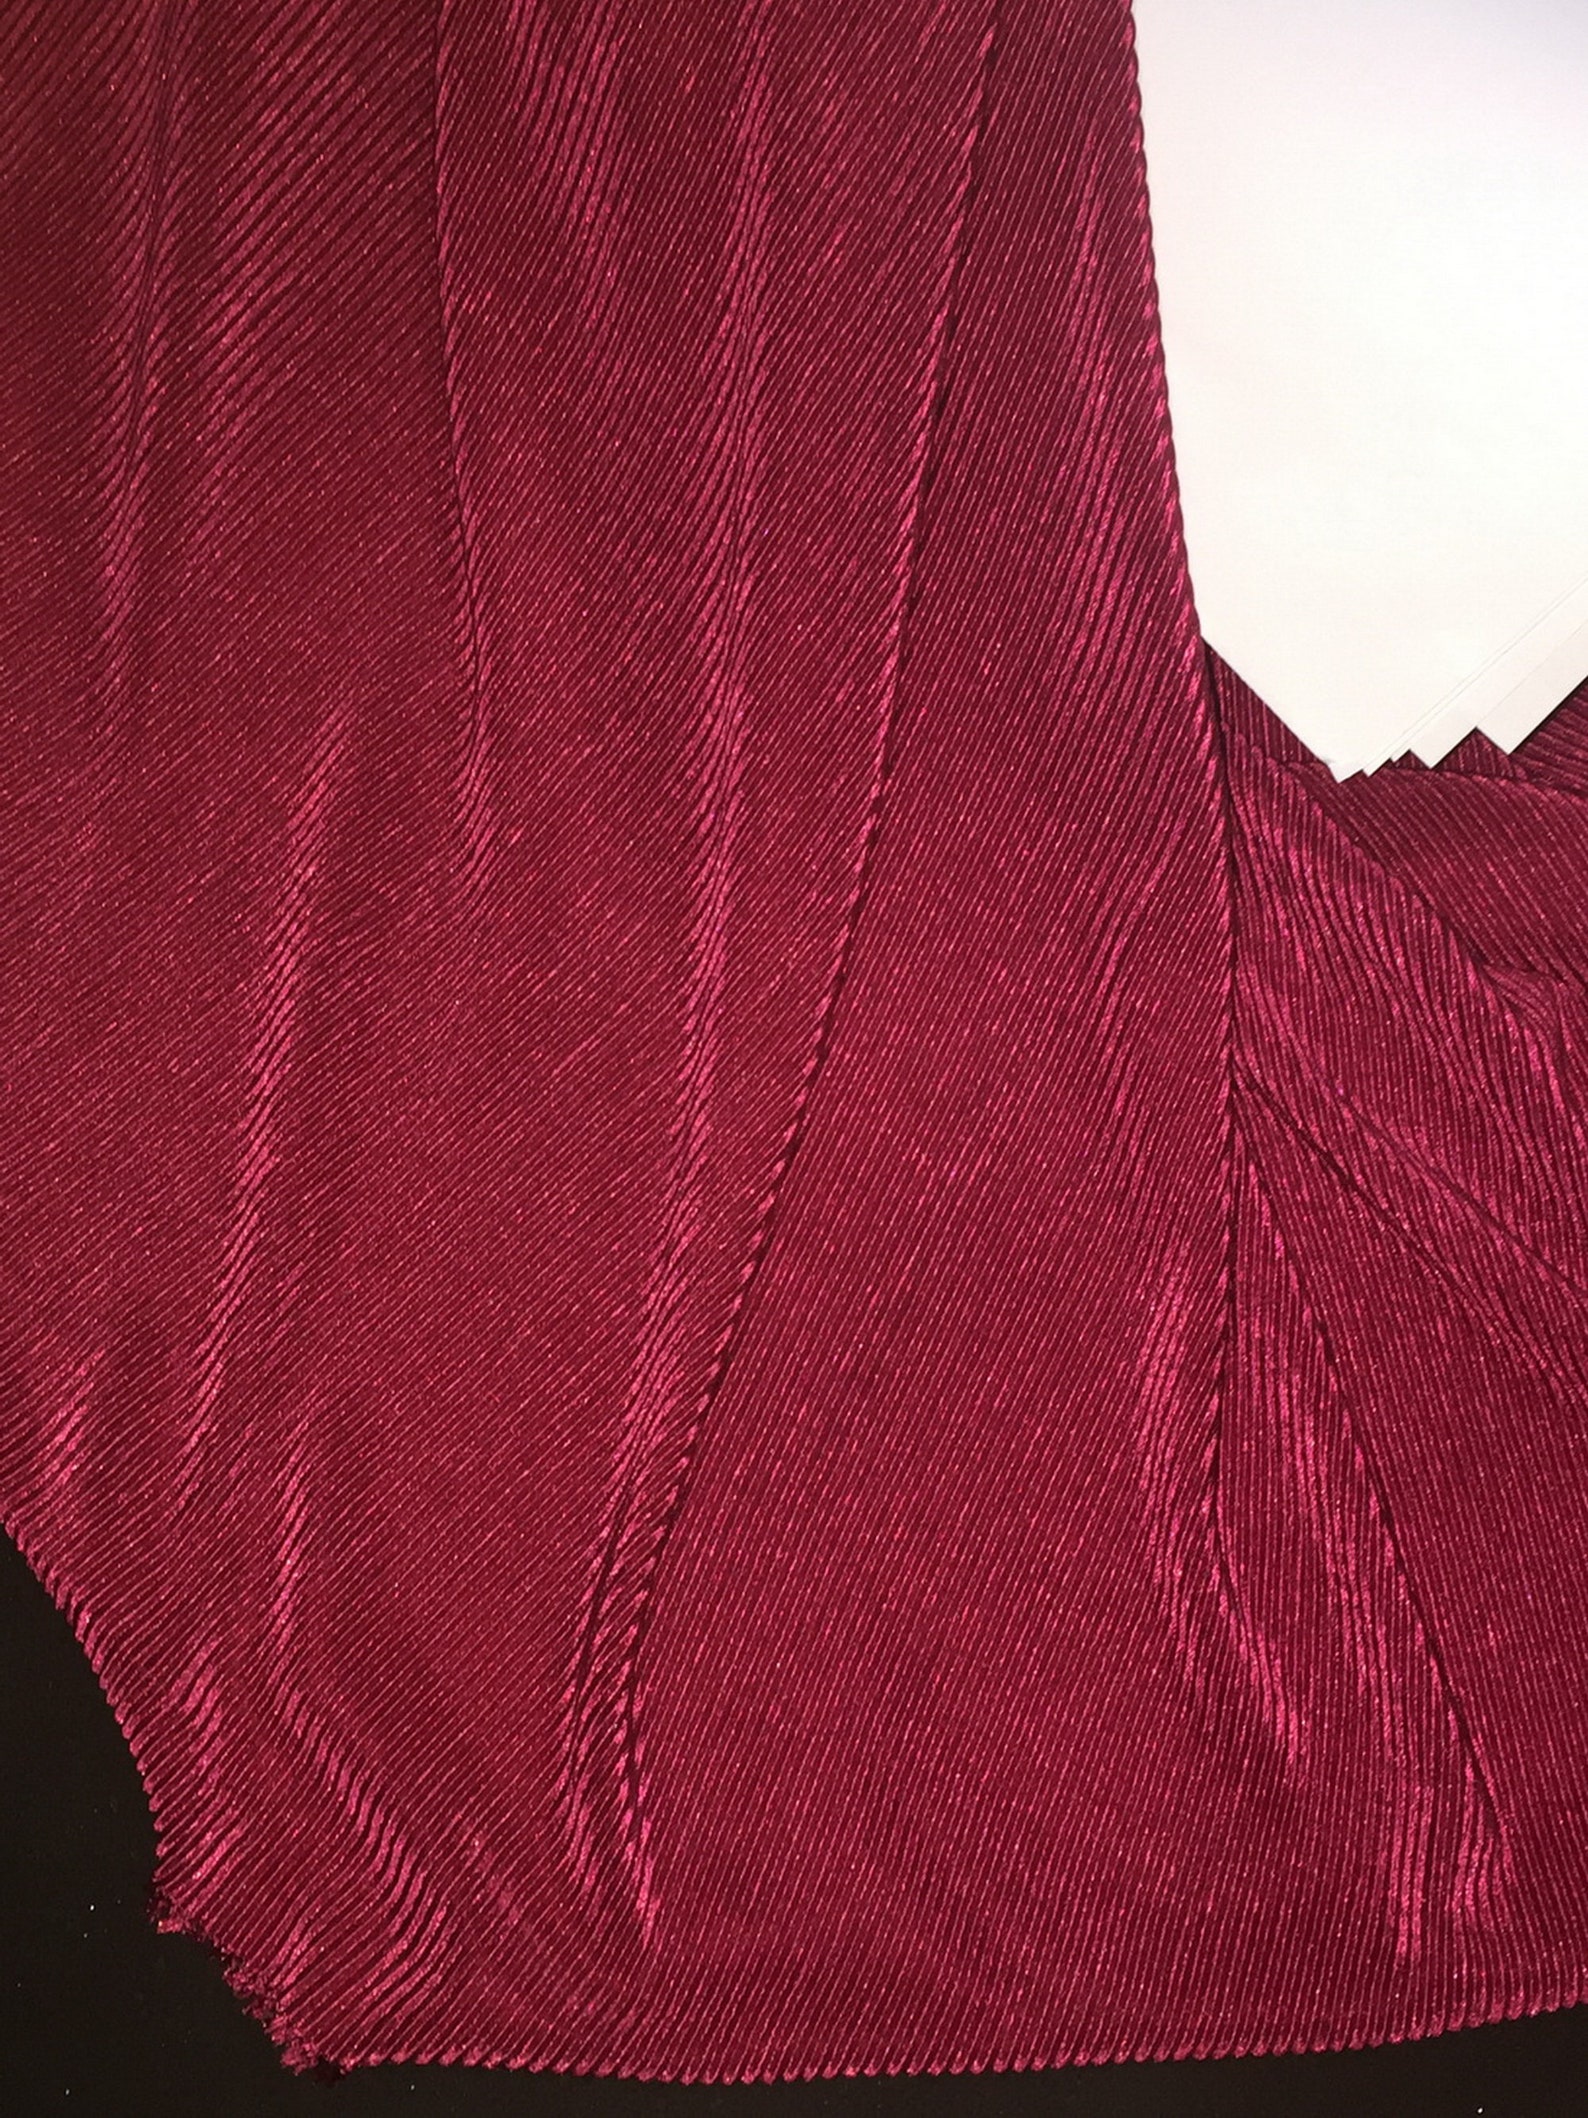 Crushed polyester satin fabric BURGUNDY color 59''wide | Etsy